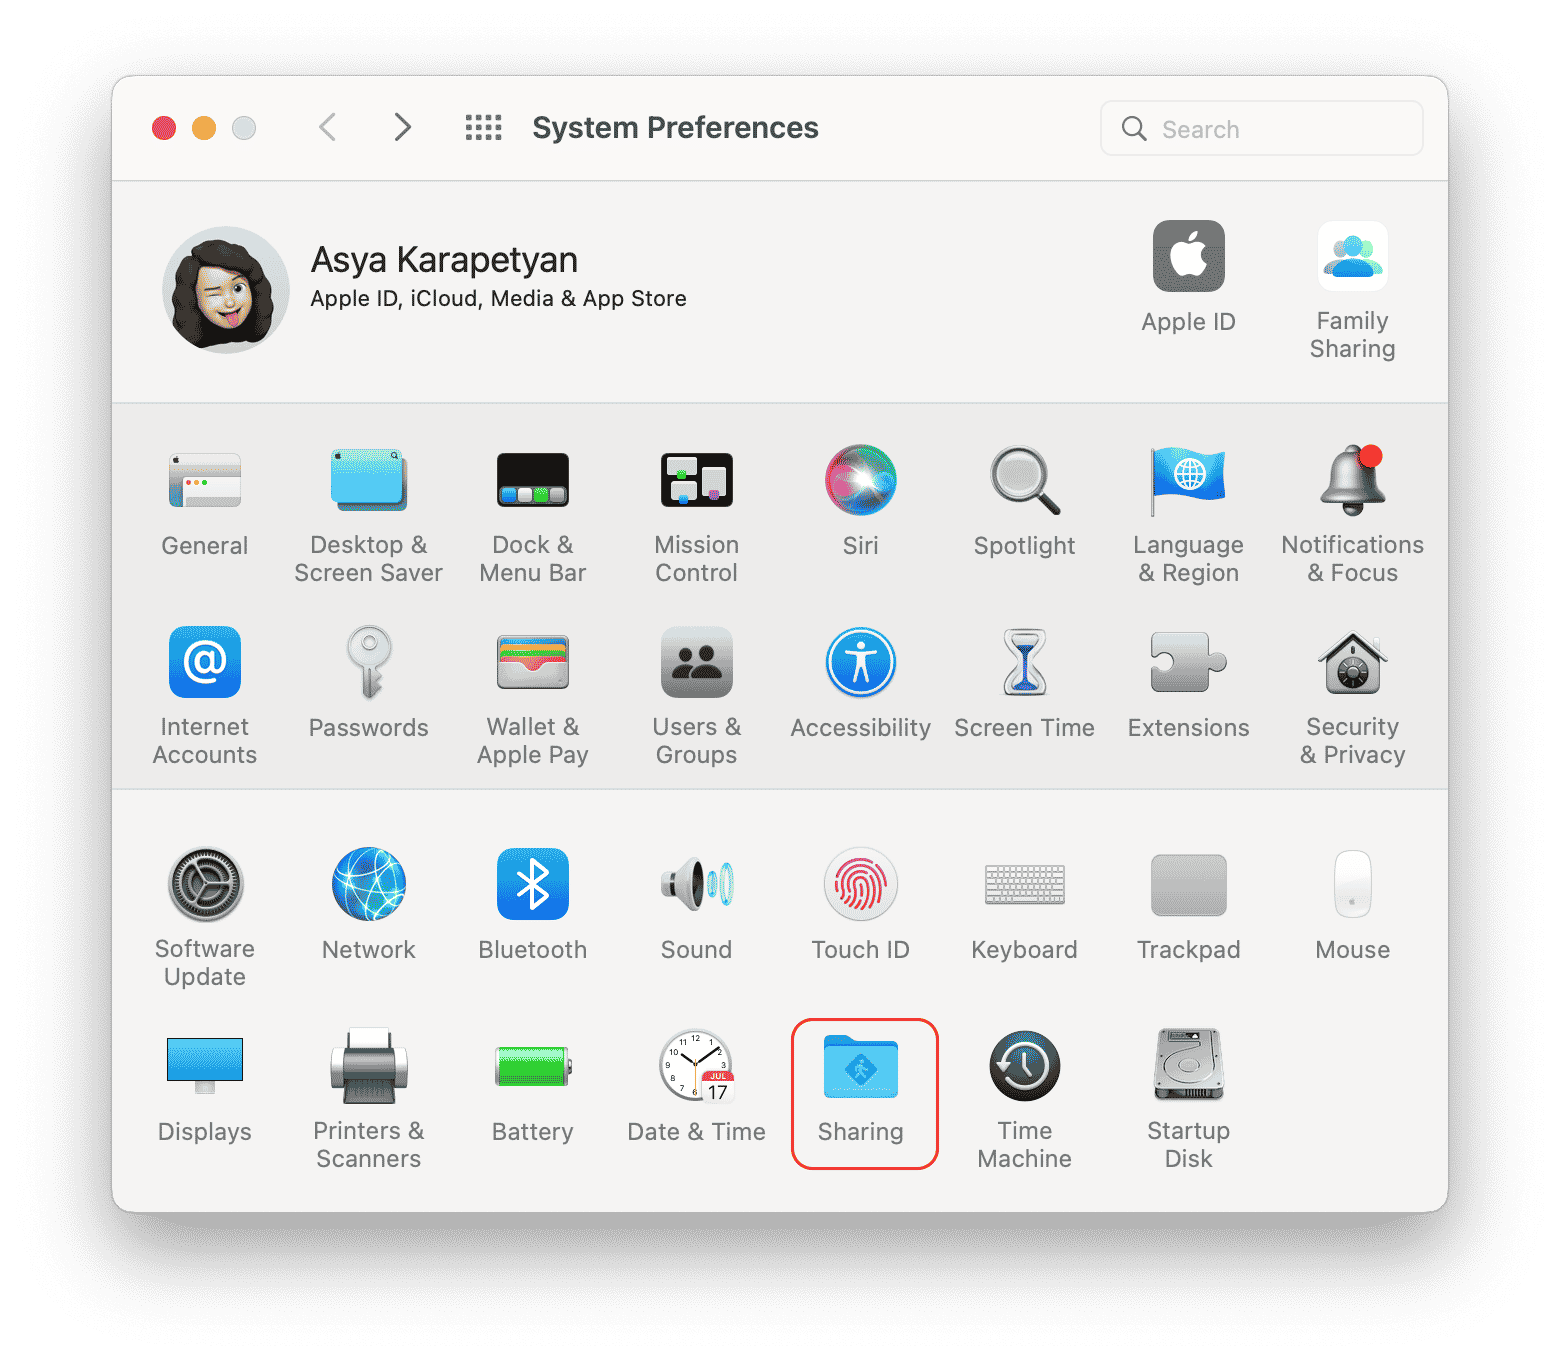 System Preferences with the Sharing icon highlighted